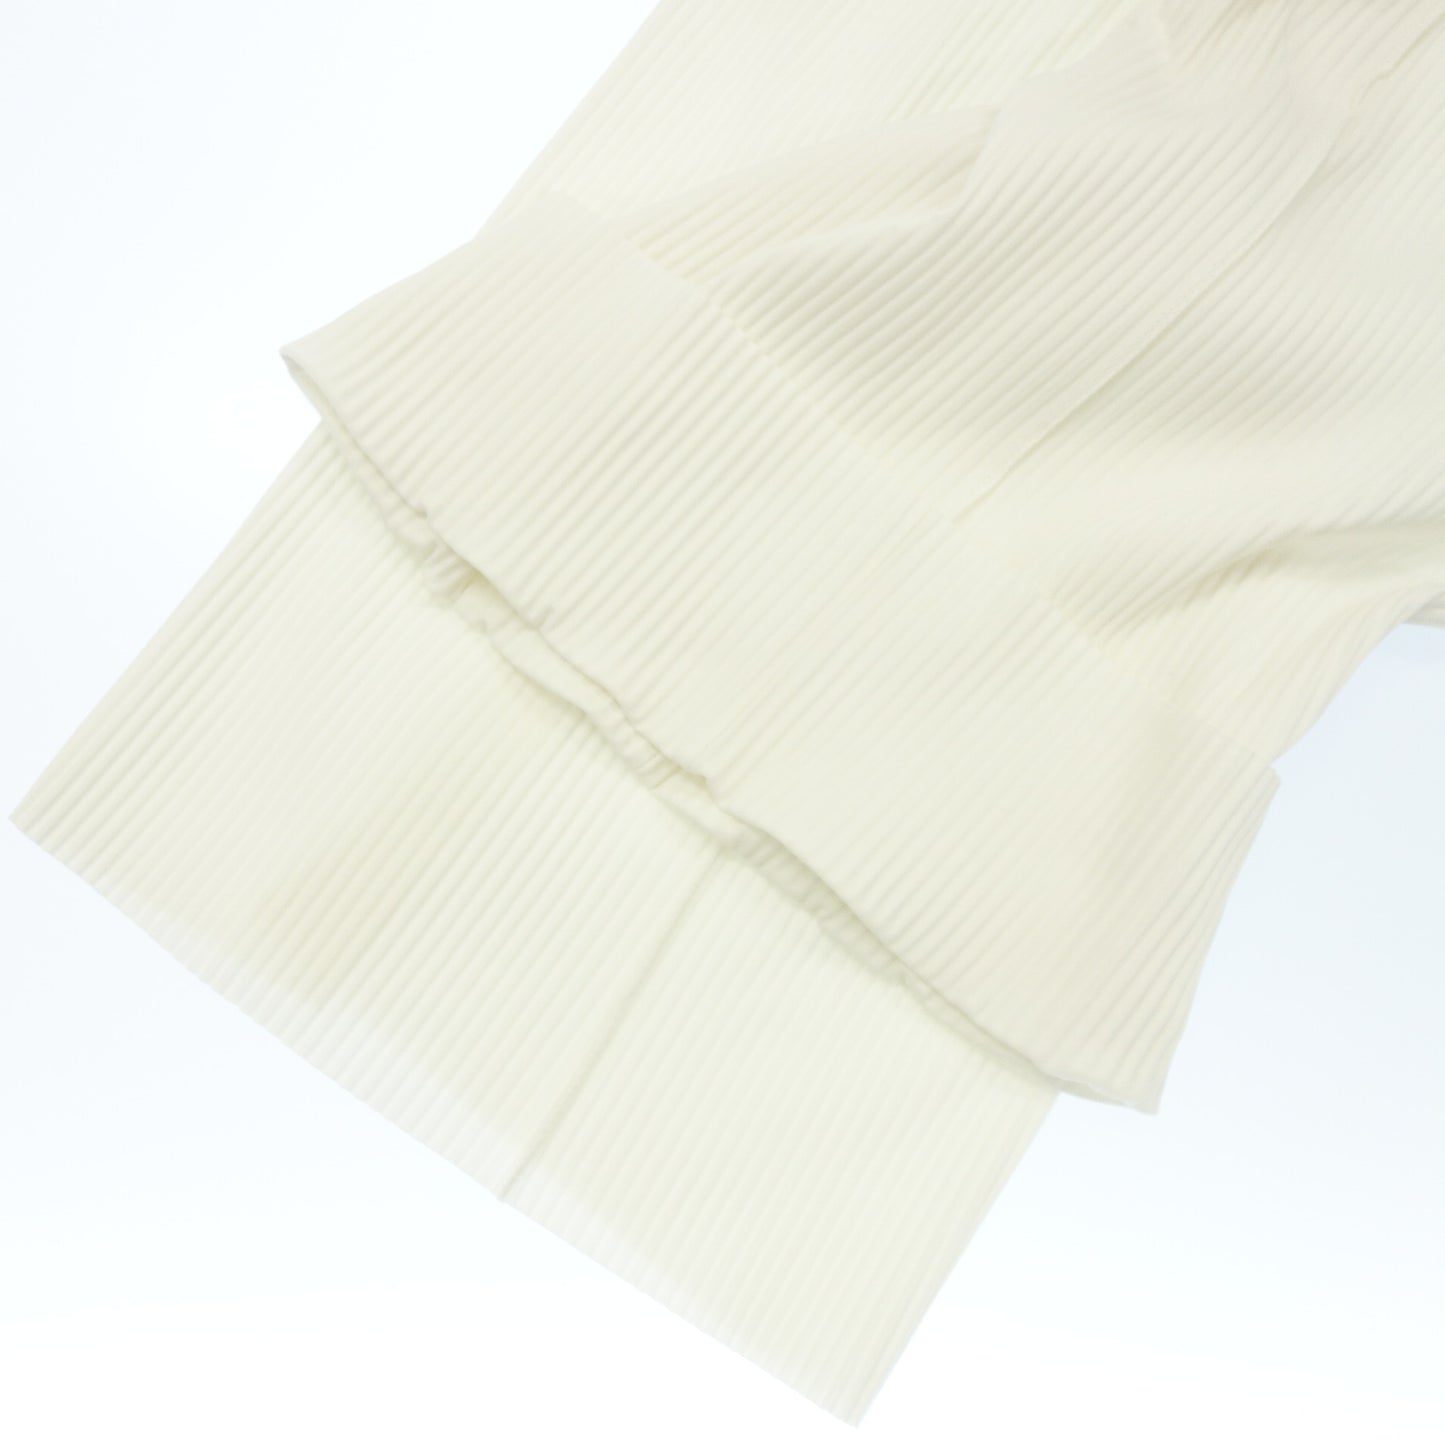 Good condition ◆ ISSEY MIYAKE me A-POC INSIDE Easy Pants Pleated MI92KF612 Women's Free Size White ISSEY MIYAKE me [AFB30] 